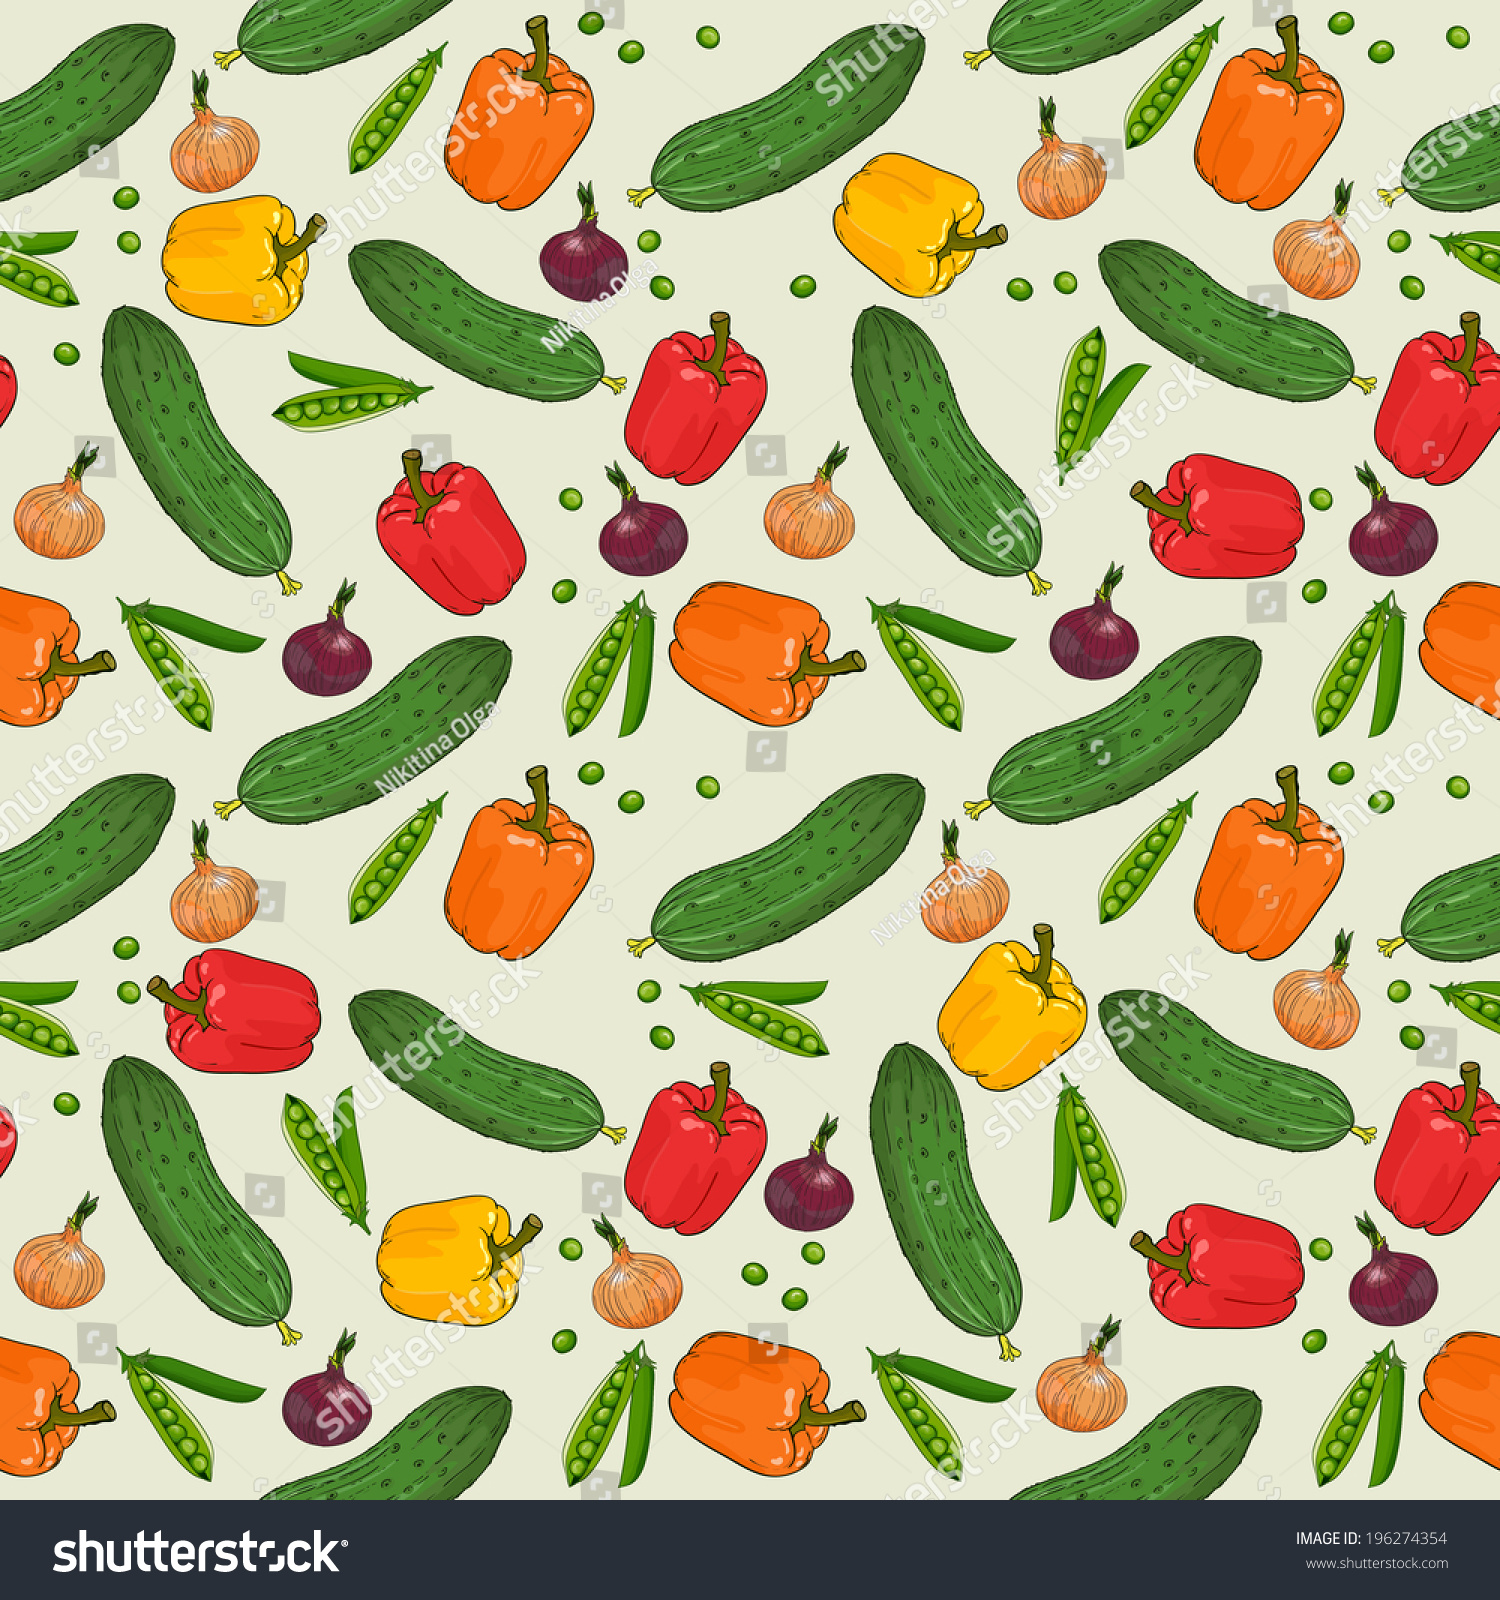 Vegetables pattern in vector, seamless pattern background #196274354